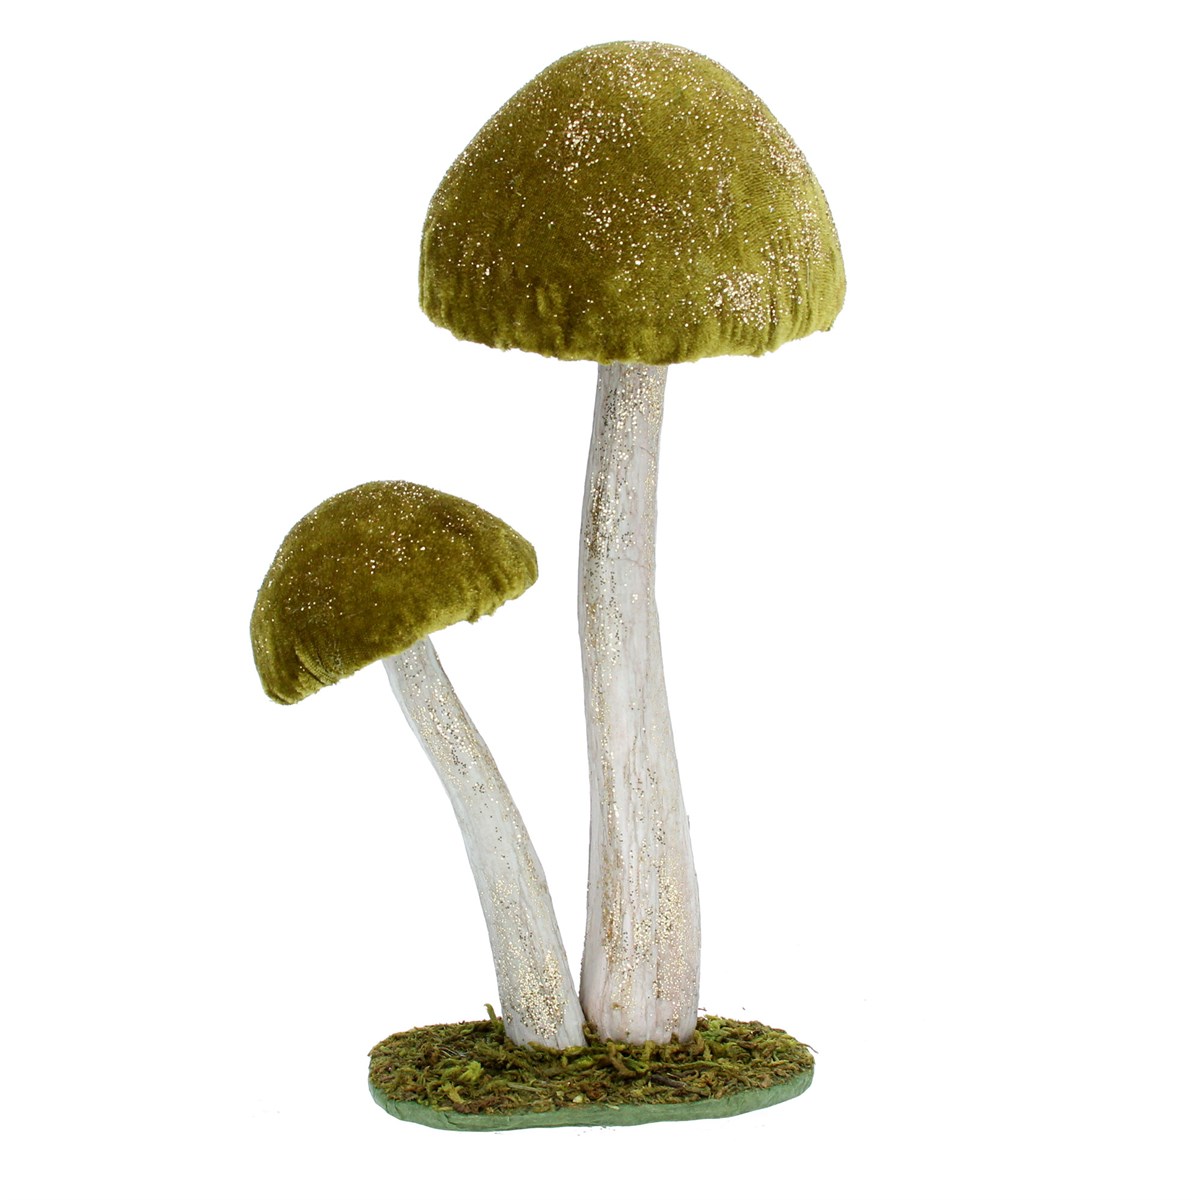 Green fabric toadstool Ornament. By Gisela Graham.